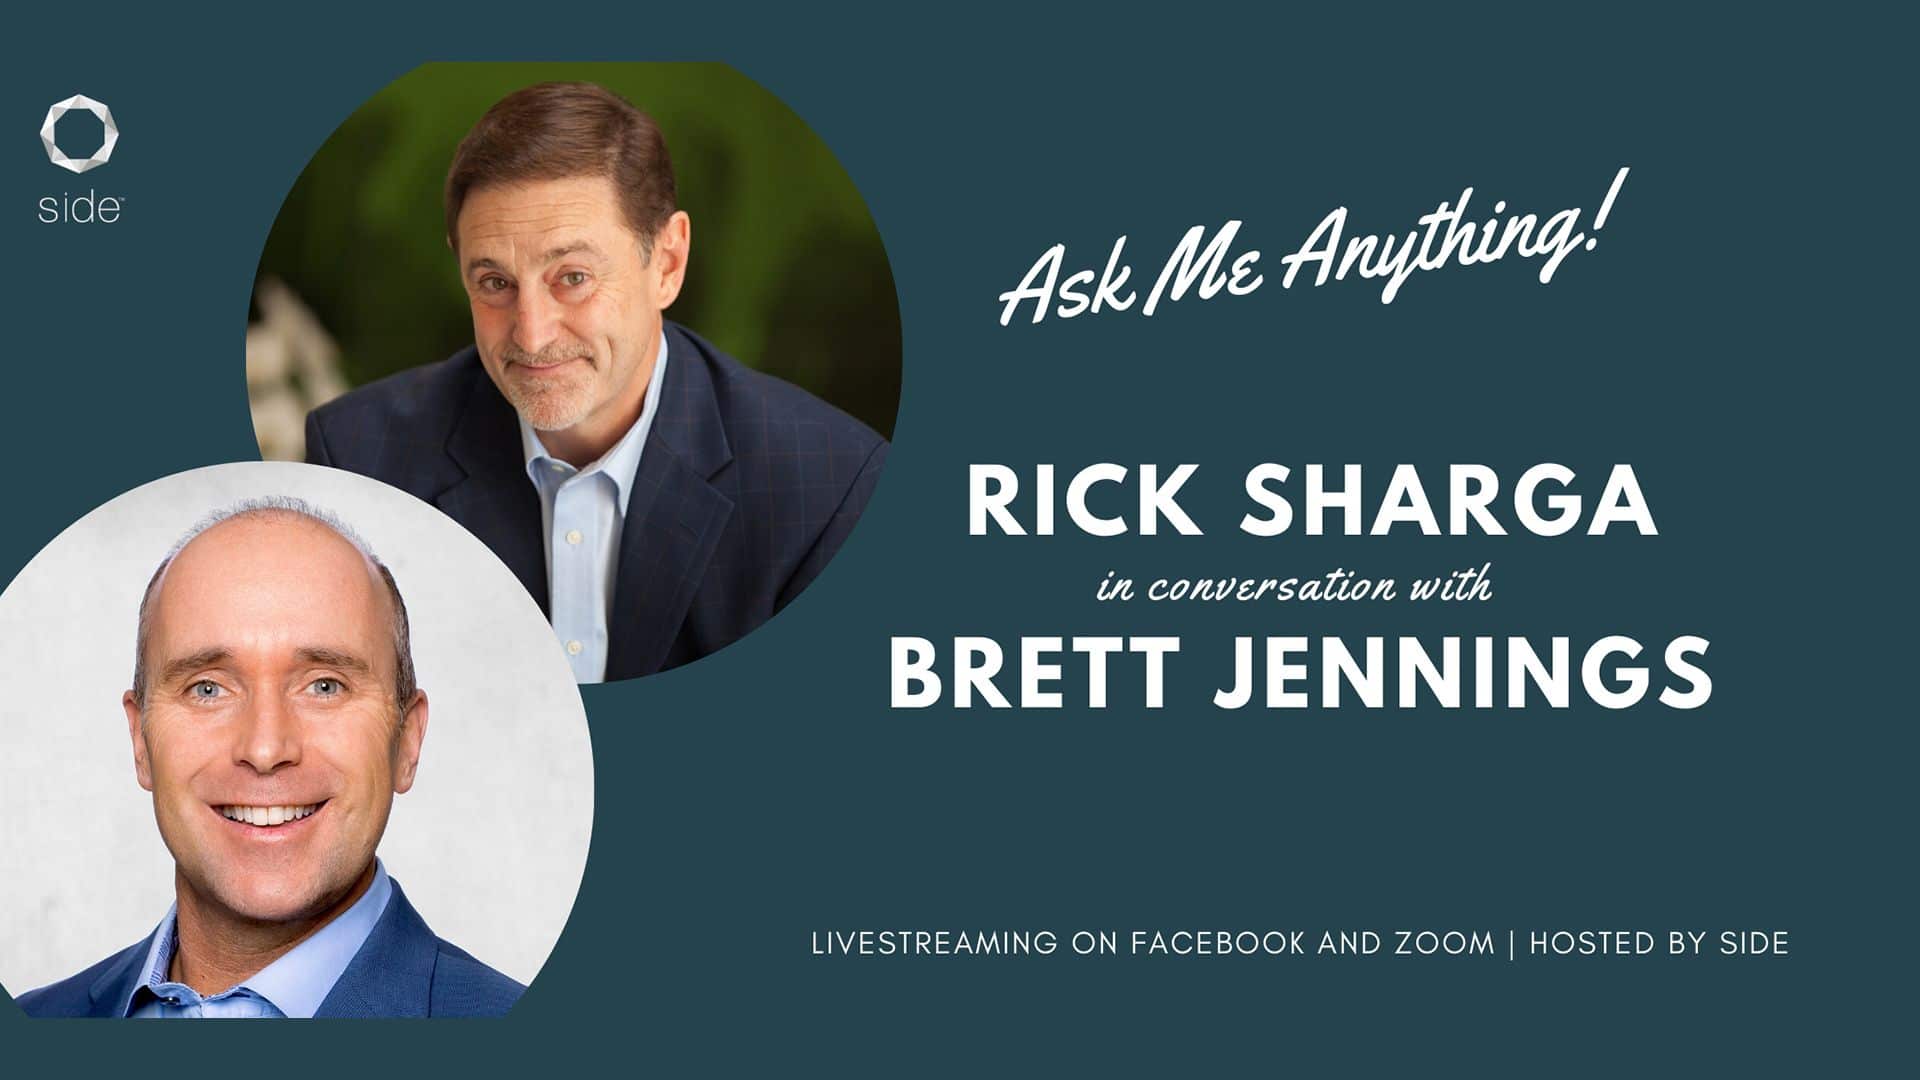 Ask Me Anything with Rick Sharga and Brett Jennings